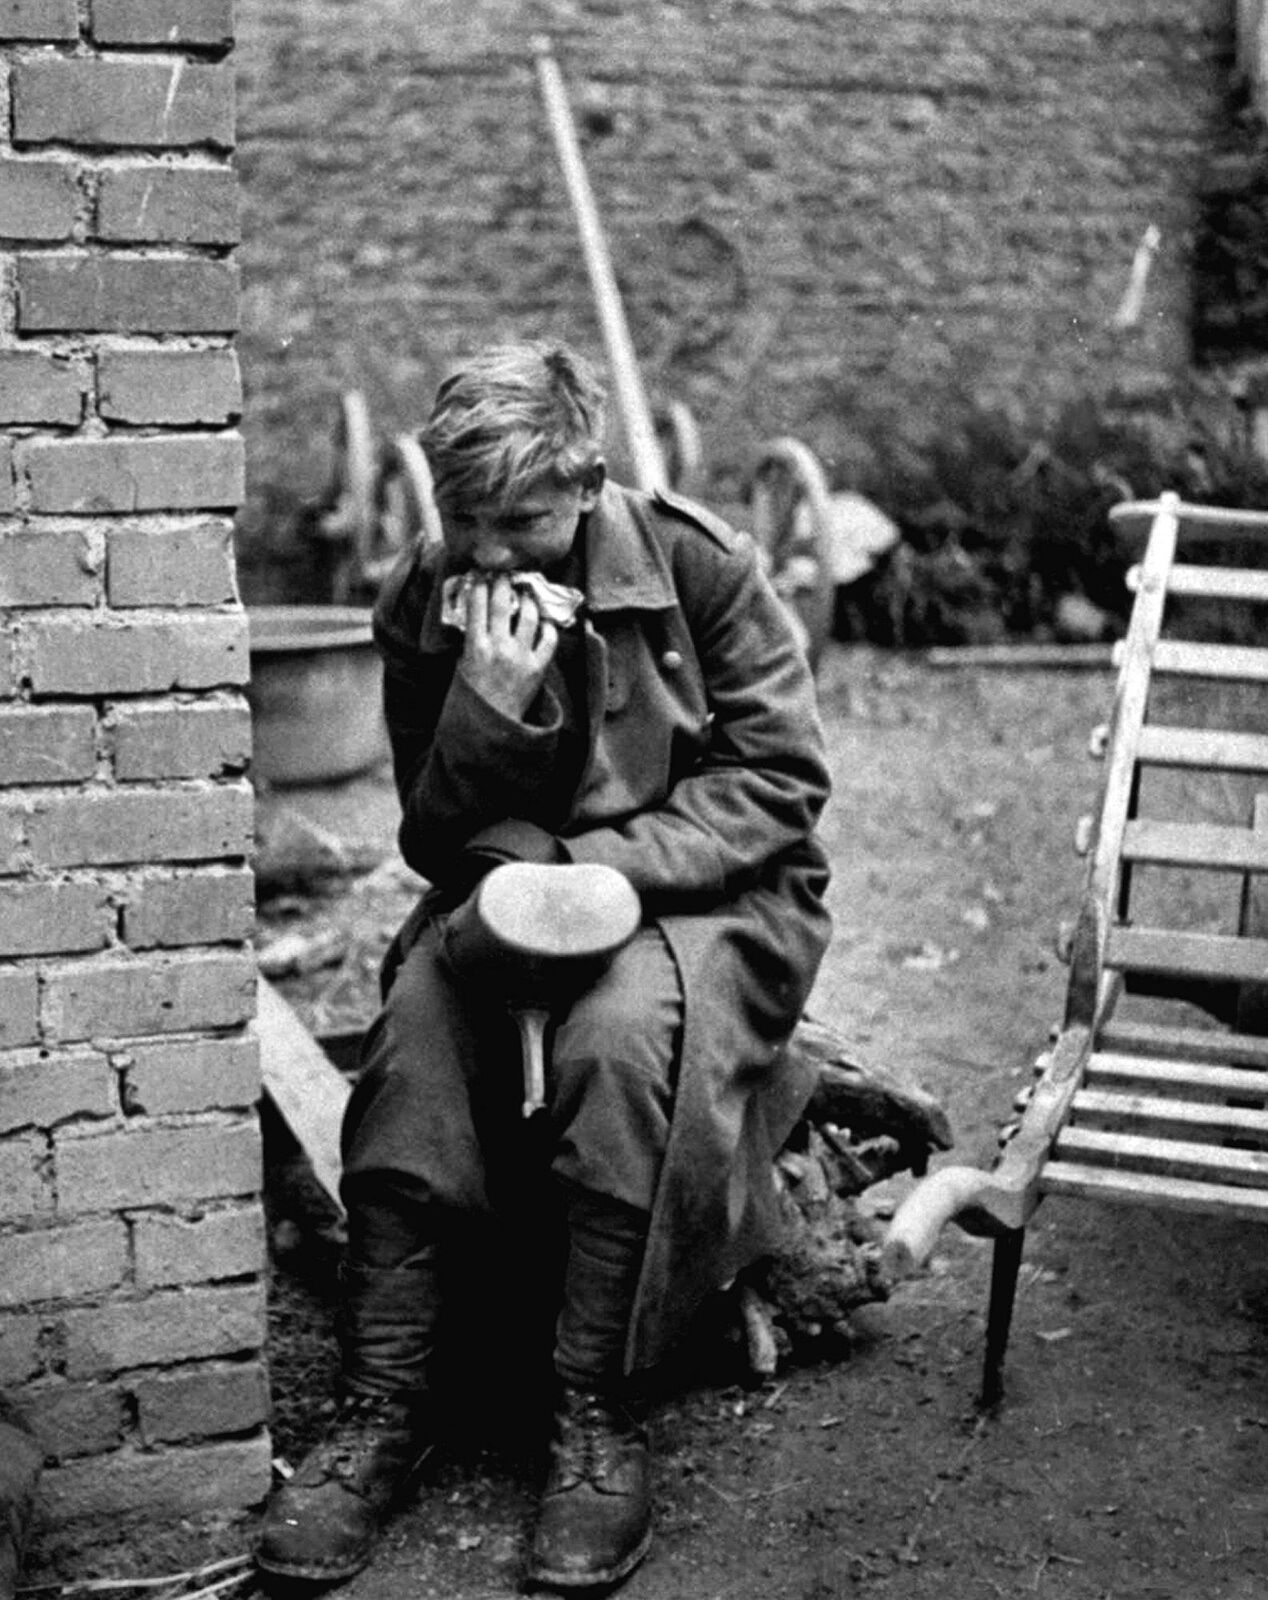 WW2 1945 FIFTEEN YEAR OLD GERMAN SOLDIER WEEPING AFTER CAPTURE Photo (222-R )